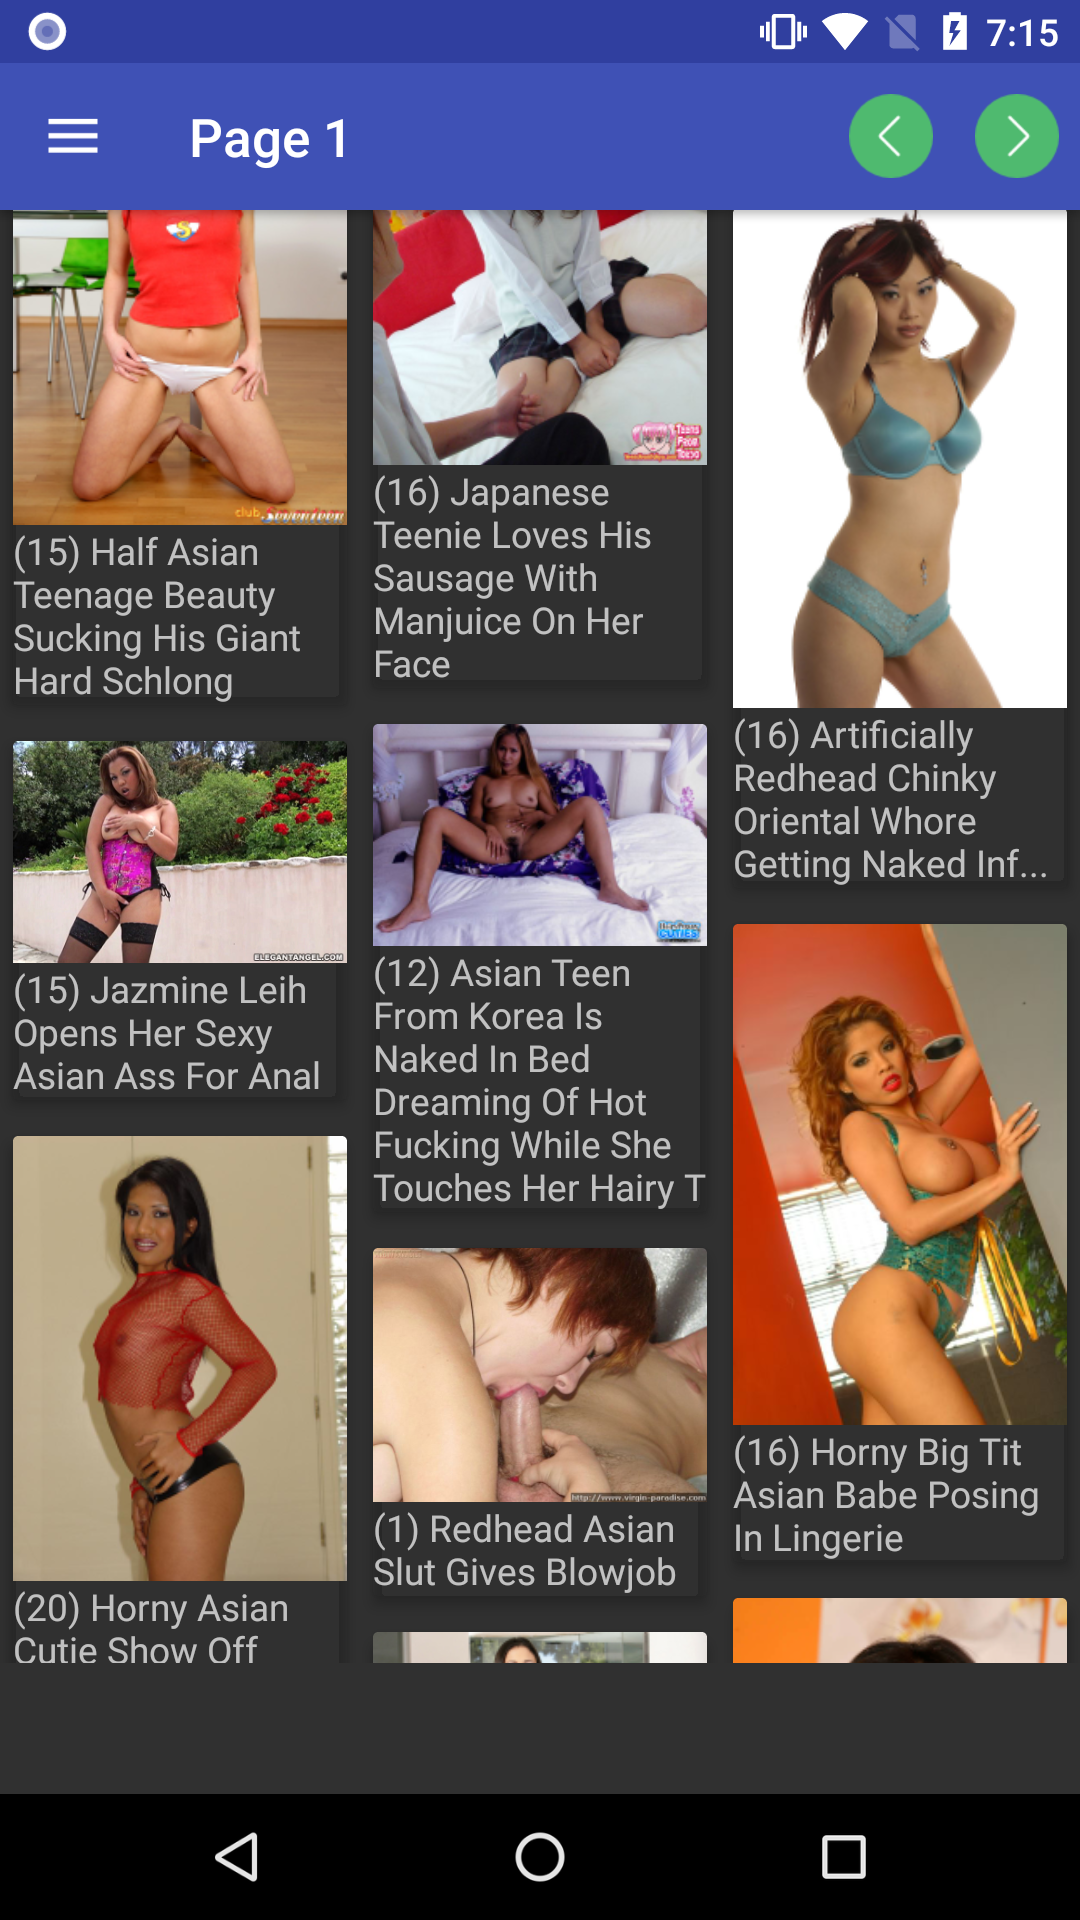 Asian Galleries 2 lily,android,app,puzzle,porn,apps,panties,pictures,ocean,updates,asian,for,japan,sex,amateurs,hentai,lane,pics,and,aletta,phone,wallpaper,watching,sexy,galleries,pornstars